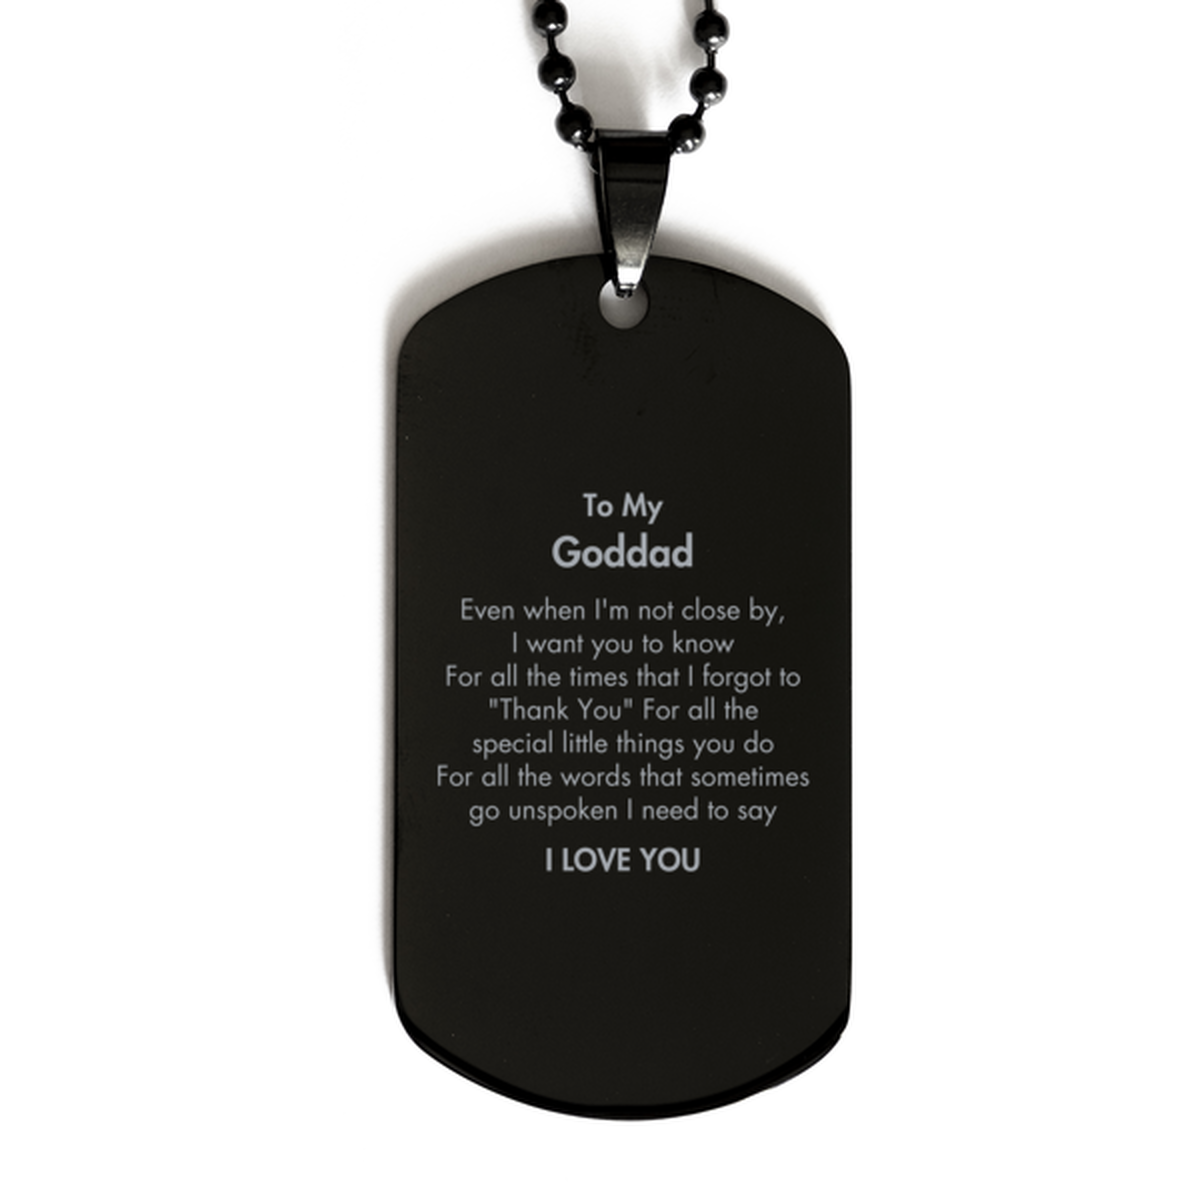 Thank You Gifts for Goddad, Keepsake Black Dog Tag Gifts for Goddad Birthday Mother's day Father's Day Goddad For all the words That sometimes go unspoken I need to say I LOVE YOU